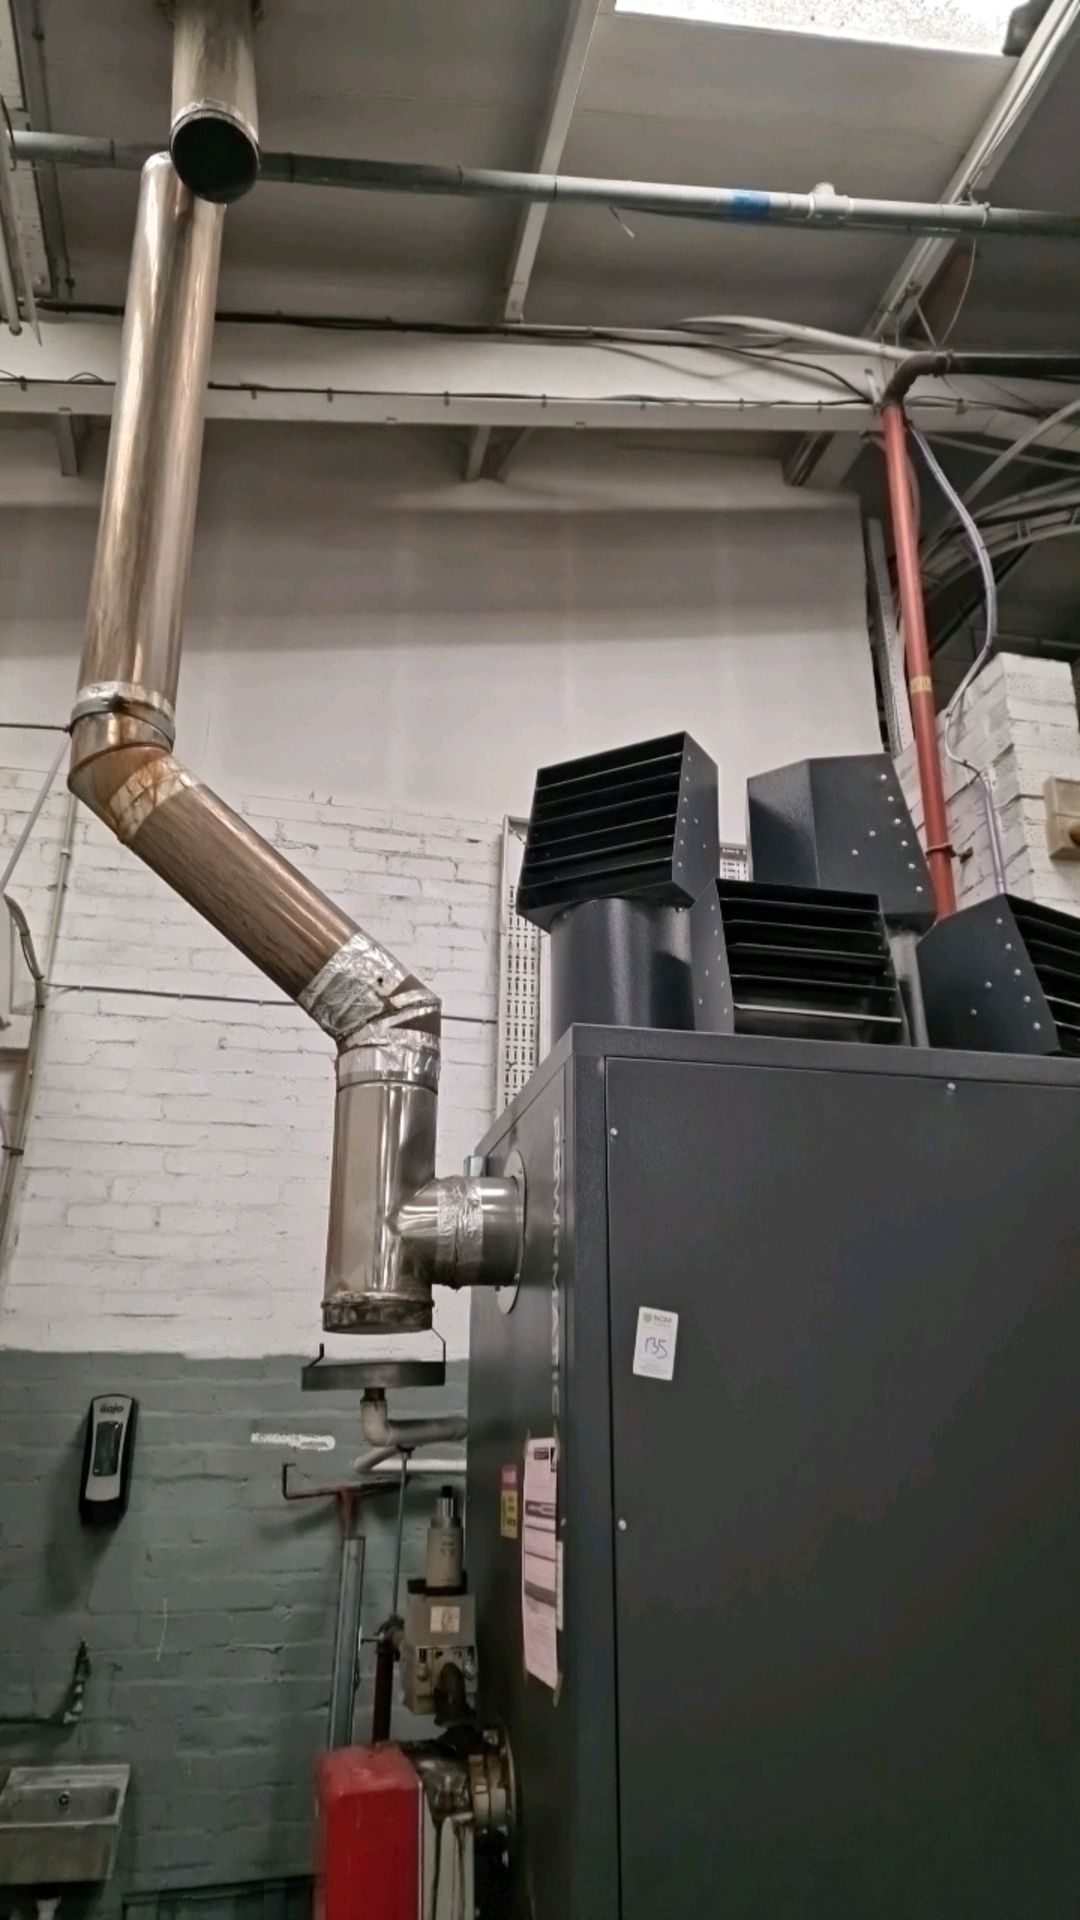 Powrmatic Industrial Heating Unit - Image 2 of 10